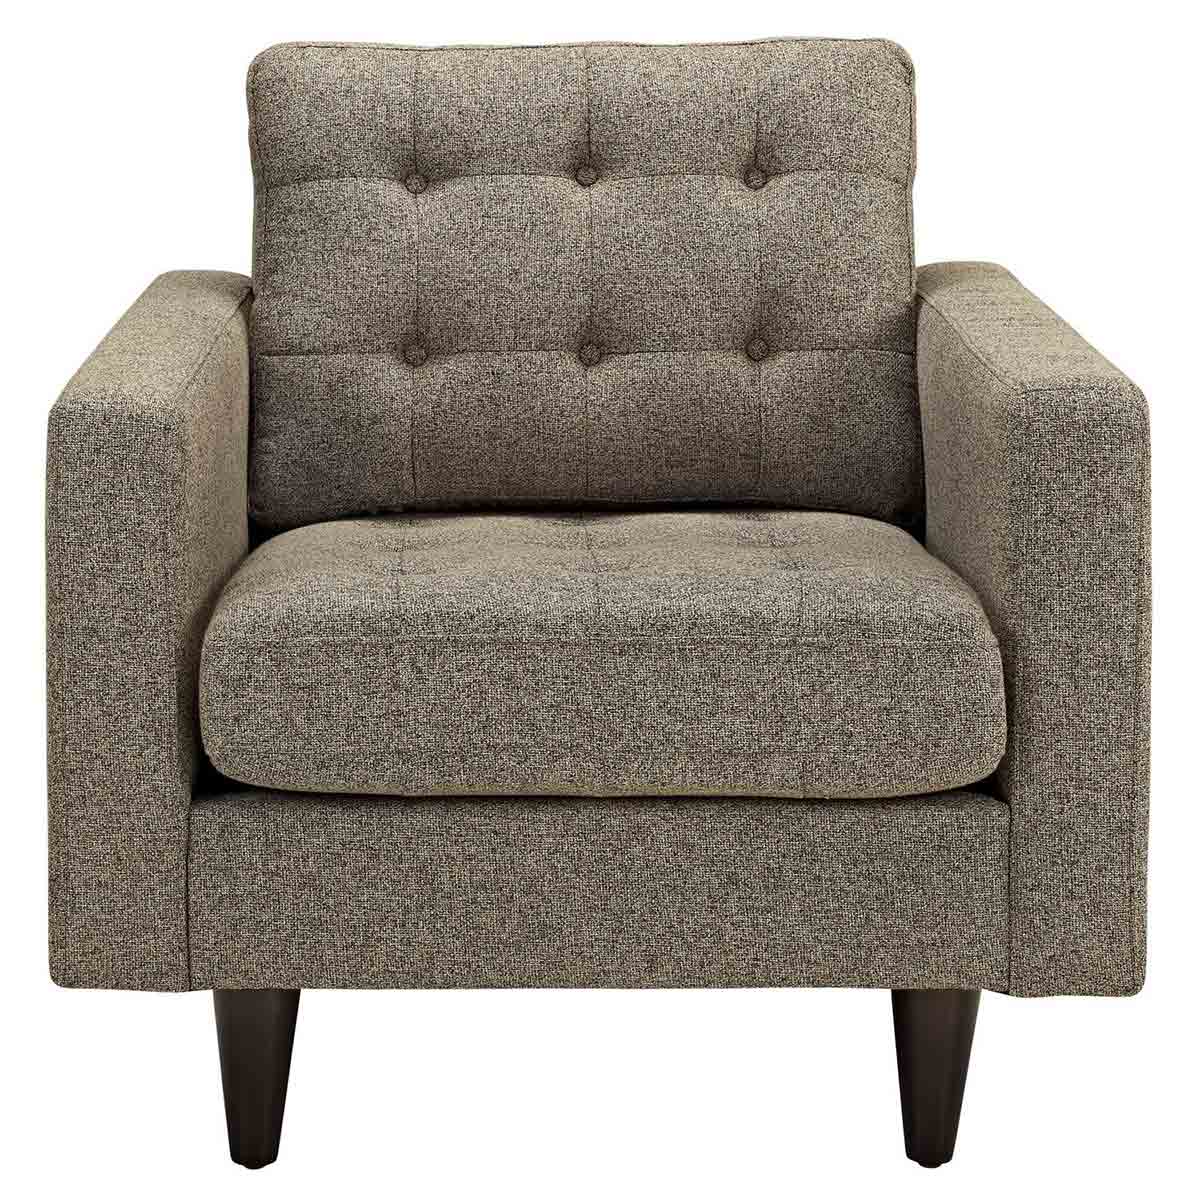 Modway Empress Armchair Upholstered Set of 2 - Oatmeal